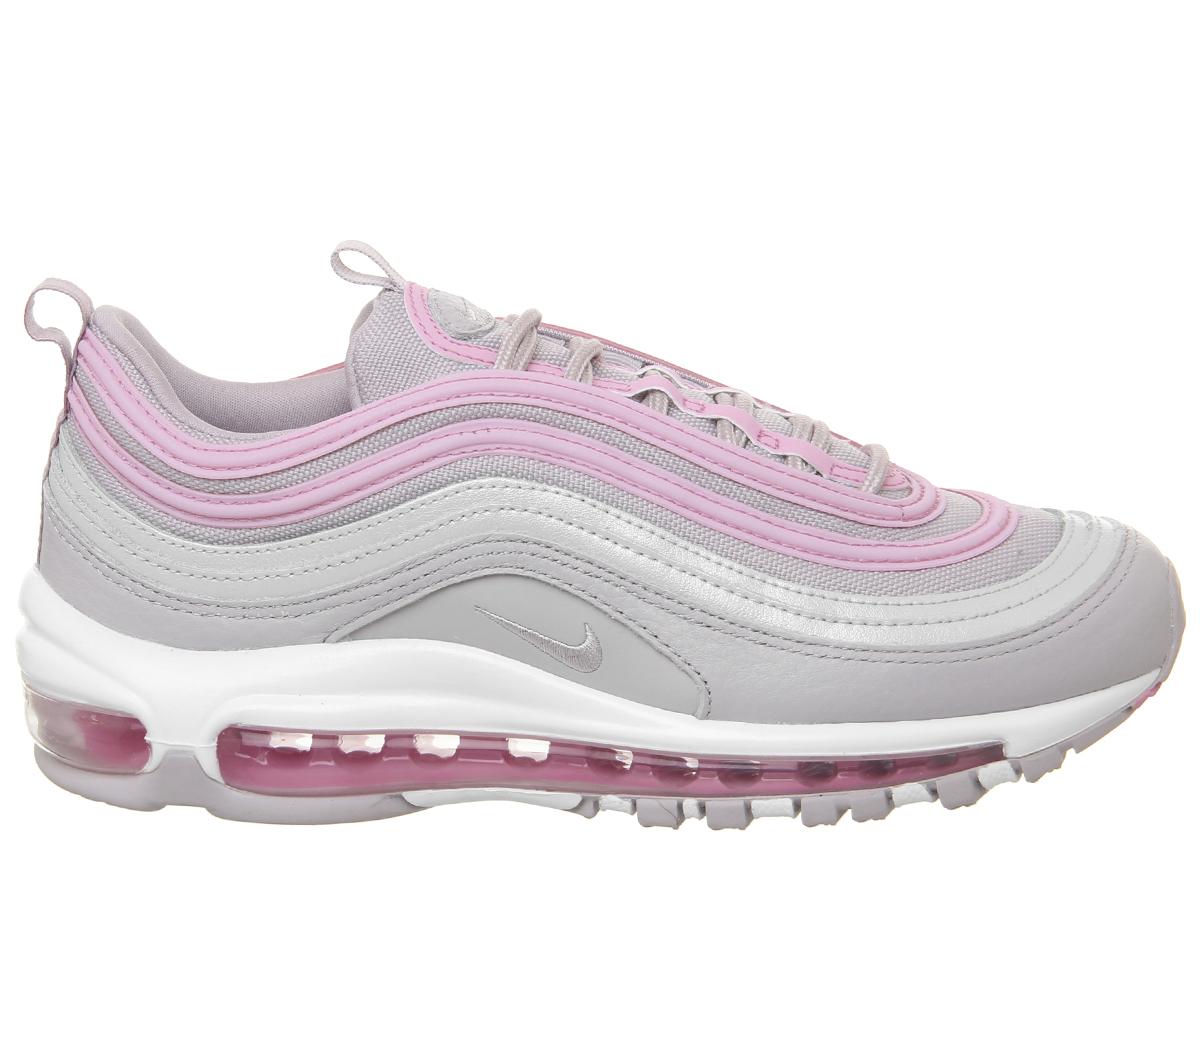 nike air max 97 trainers violet ash psychic pink lx